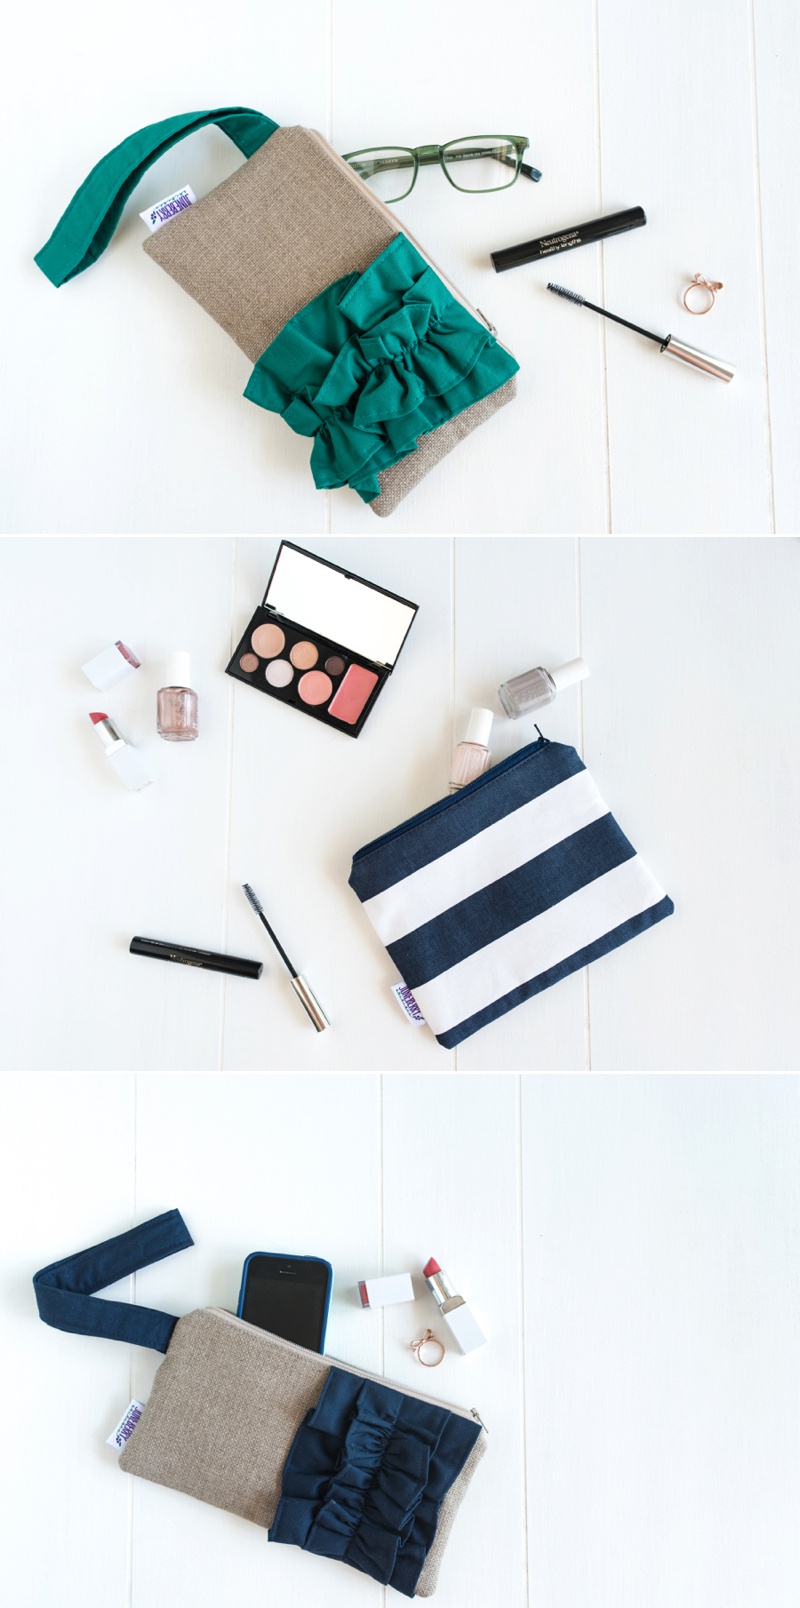 Etsy product photography and styling clutch handbag etsy shop